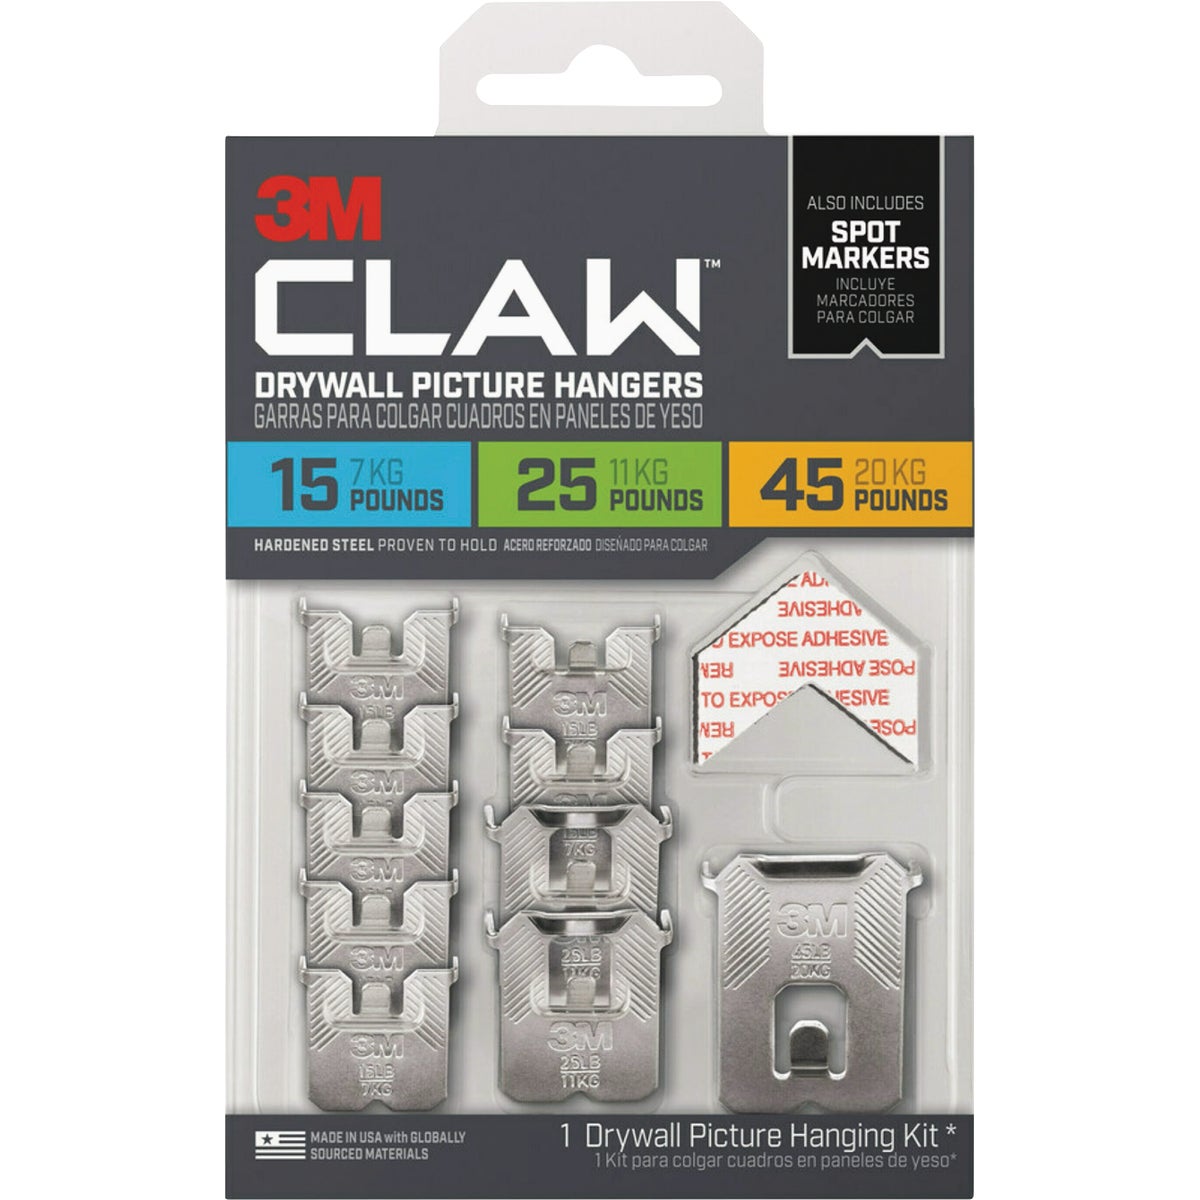 3M Claw Drywall Picture Hangers with Spot Markers (Variety Pack)